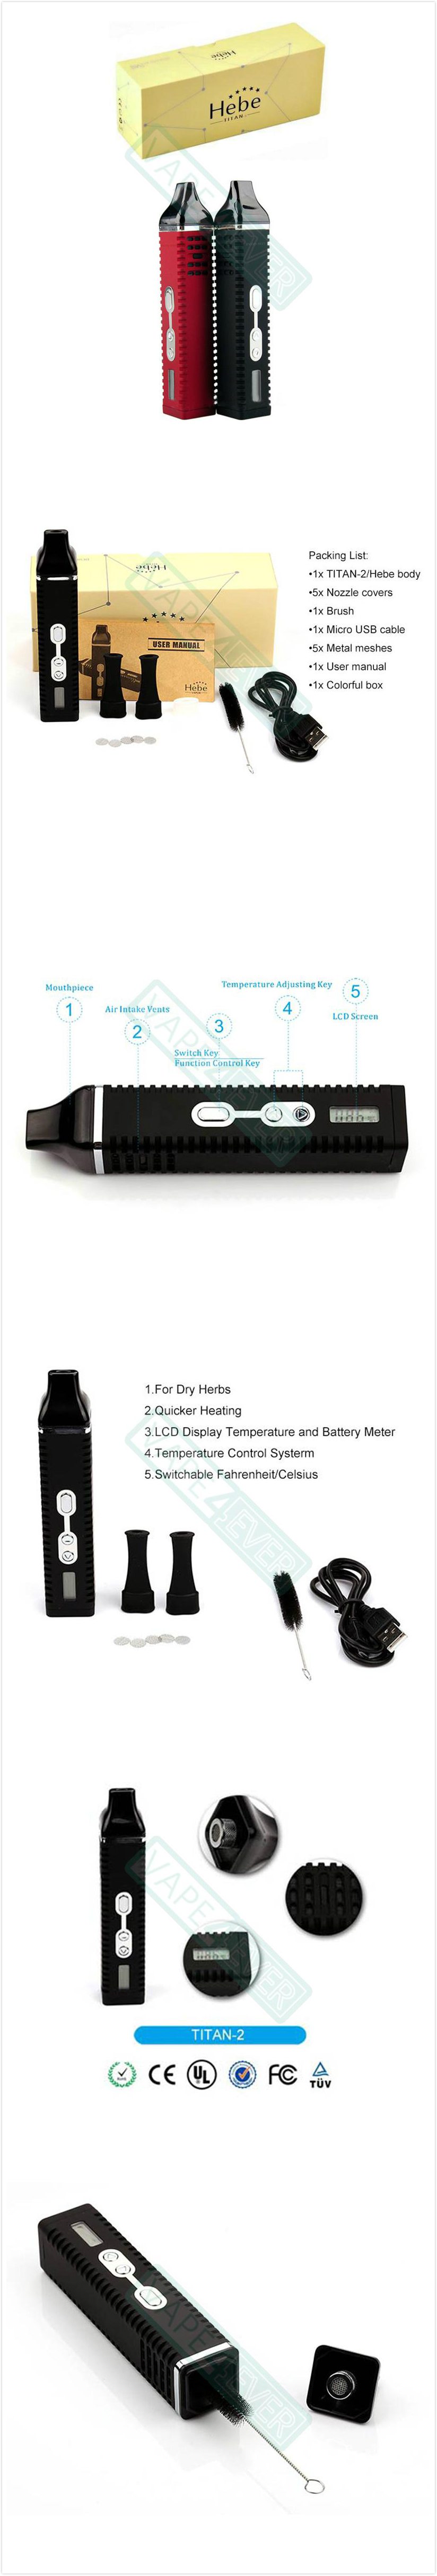 Hebe Titan 2 Vaporizer Kit 2200mah Battery With LED Screen For Dry Herb Instruction